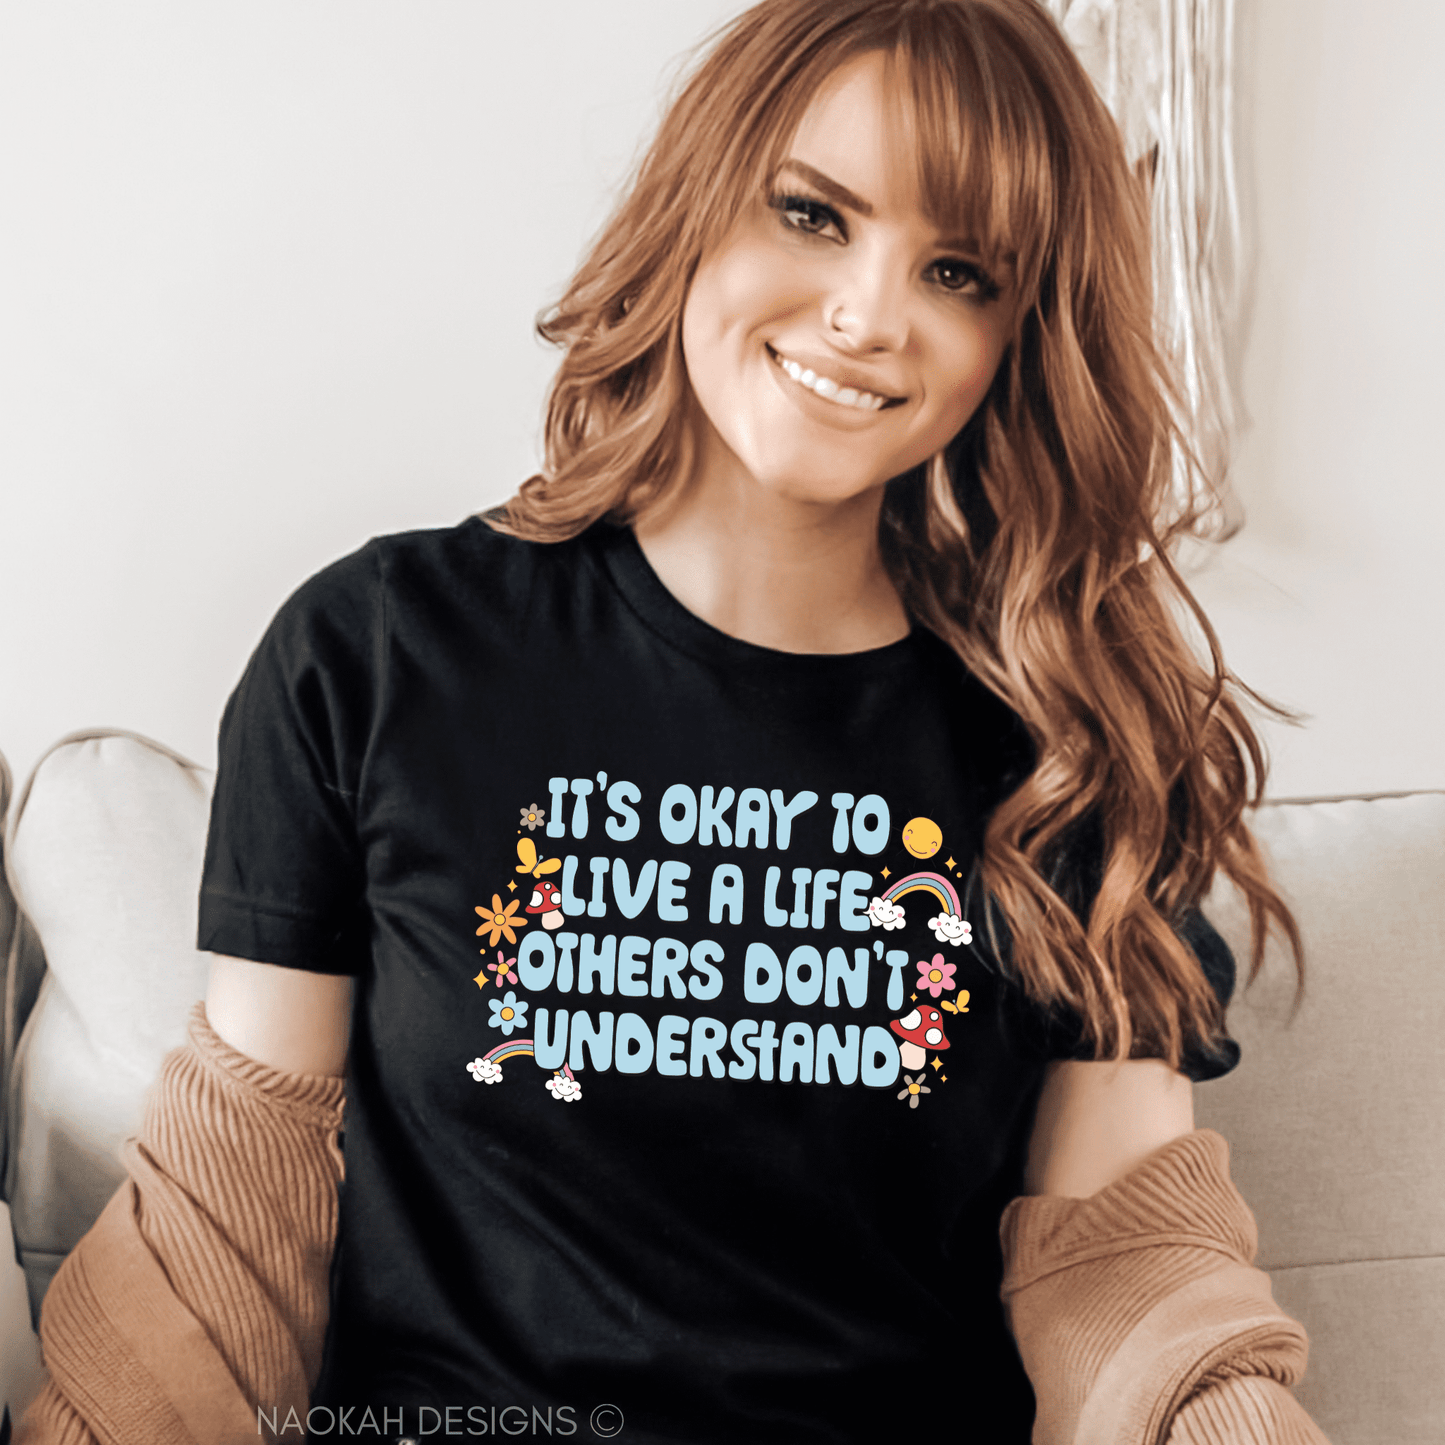 it's okay to live a life that others don't understand shirt, affirmations shirt motivational shirt, you do you shirt, self love shirt, trendy shirt, mental health shirt, protect your energy, love yourself shirt